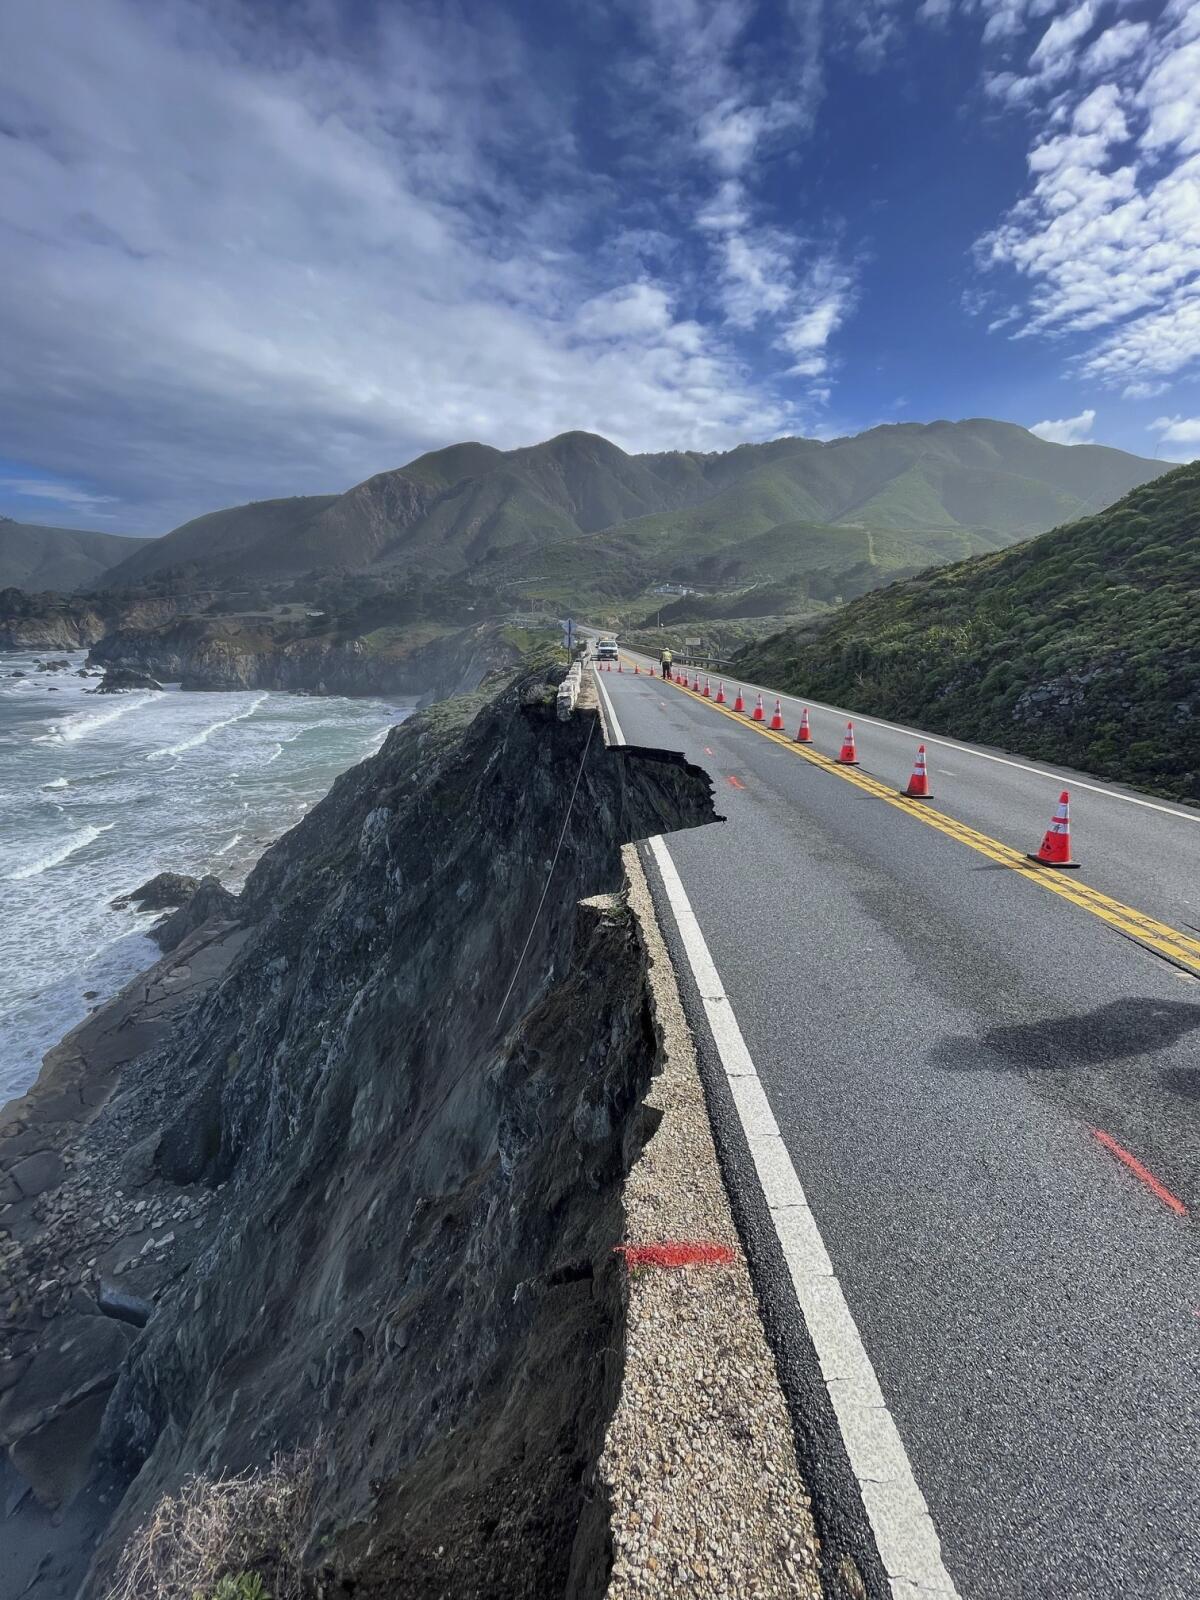 A coastal roadway has a chunk of asphalt missing. In the background is ocean, mountains and a blue sky with clouds.